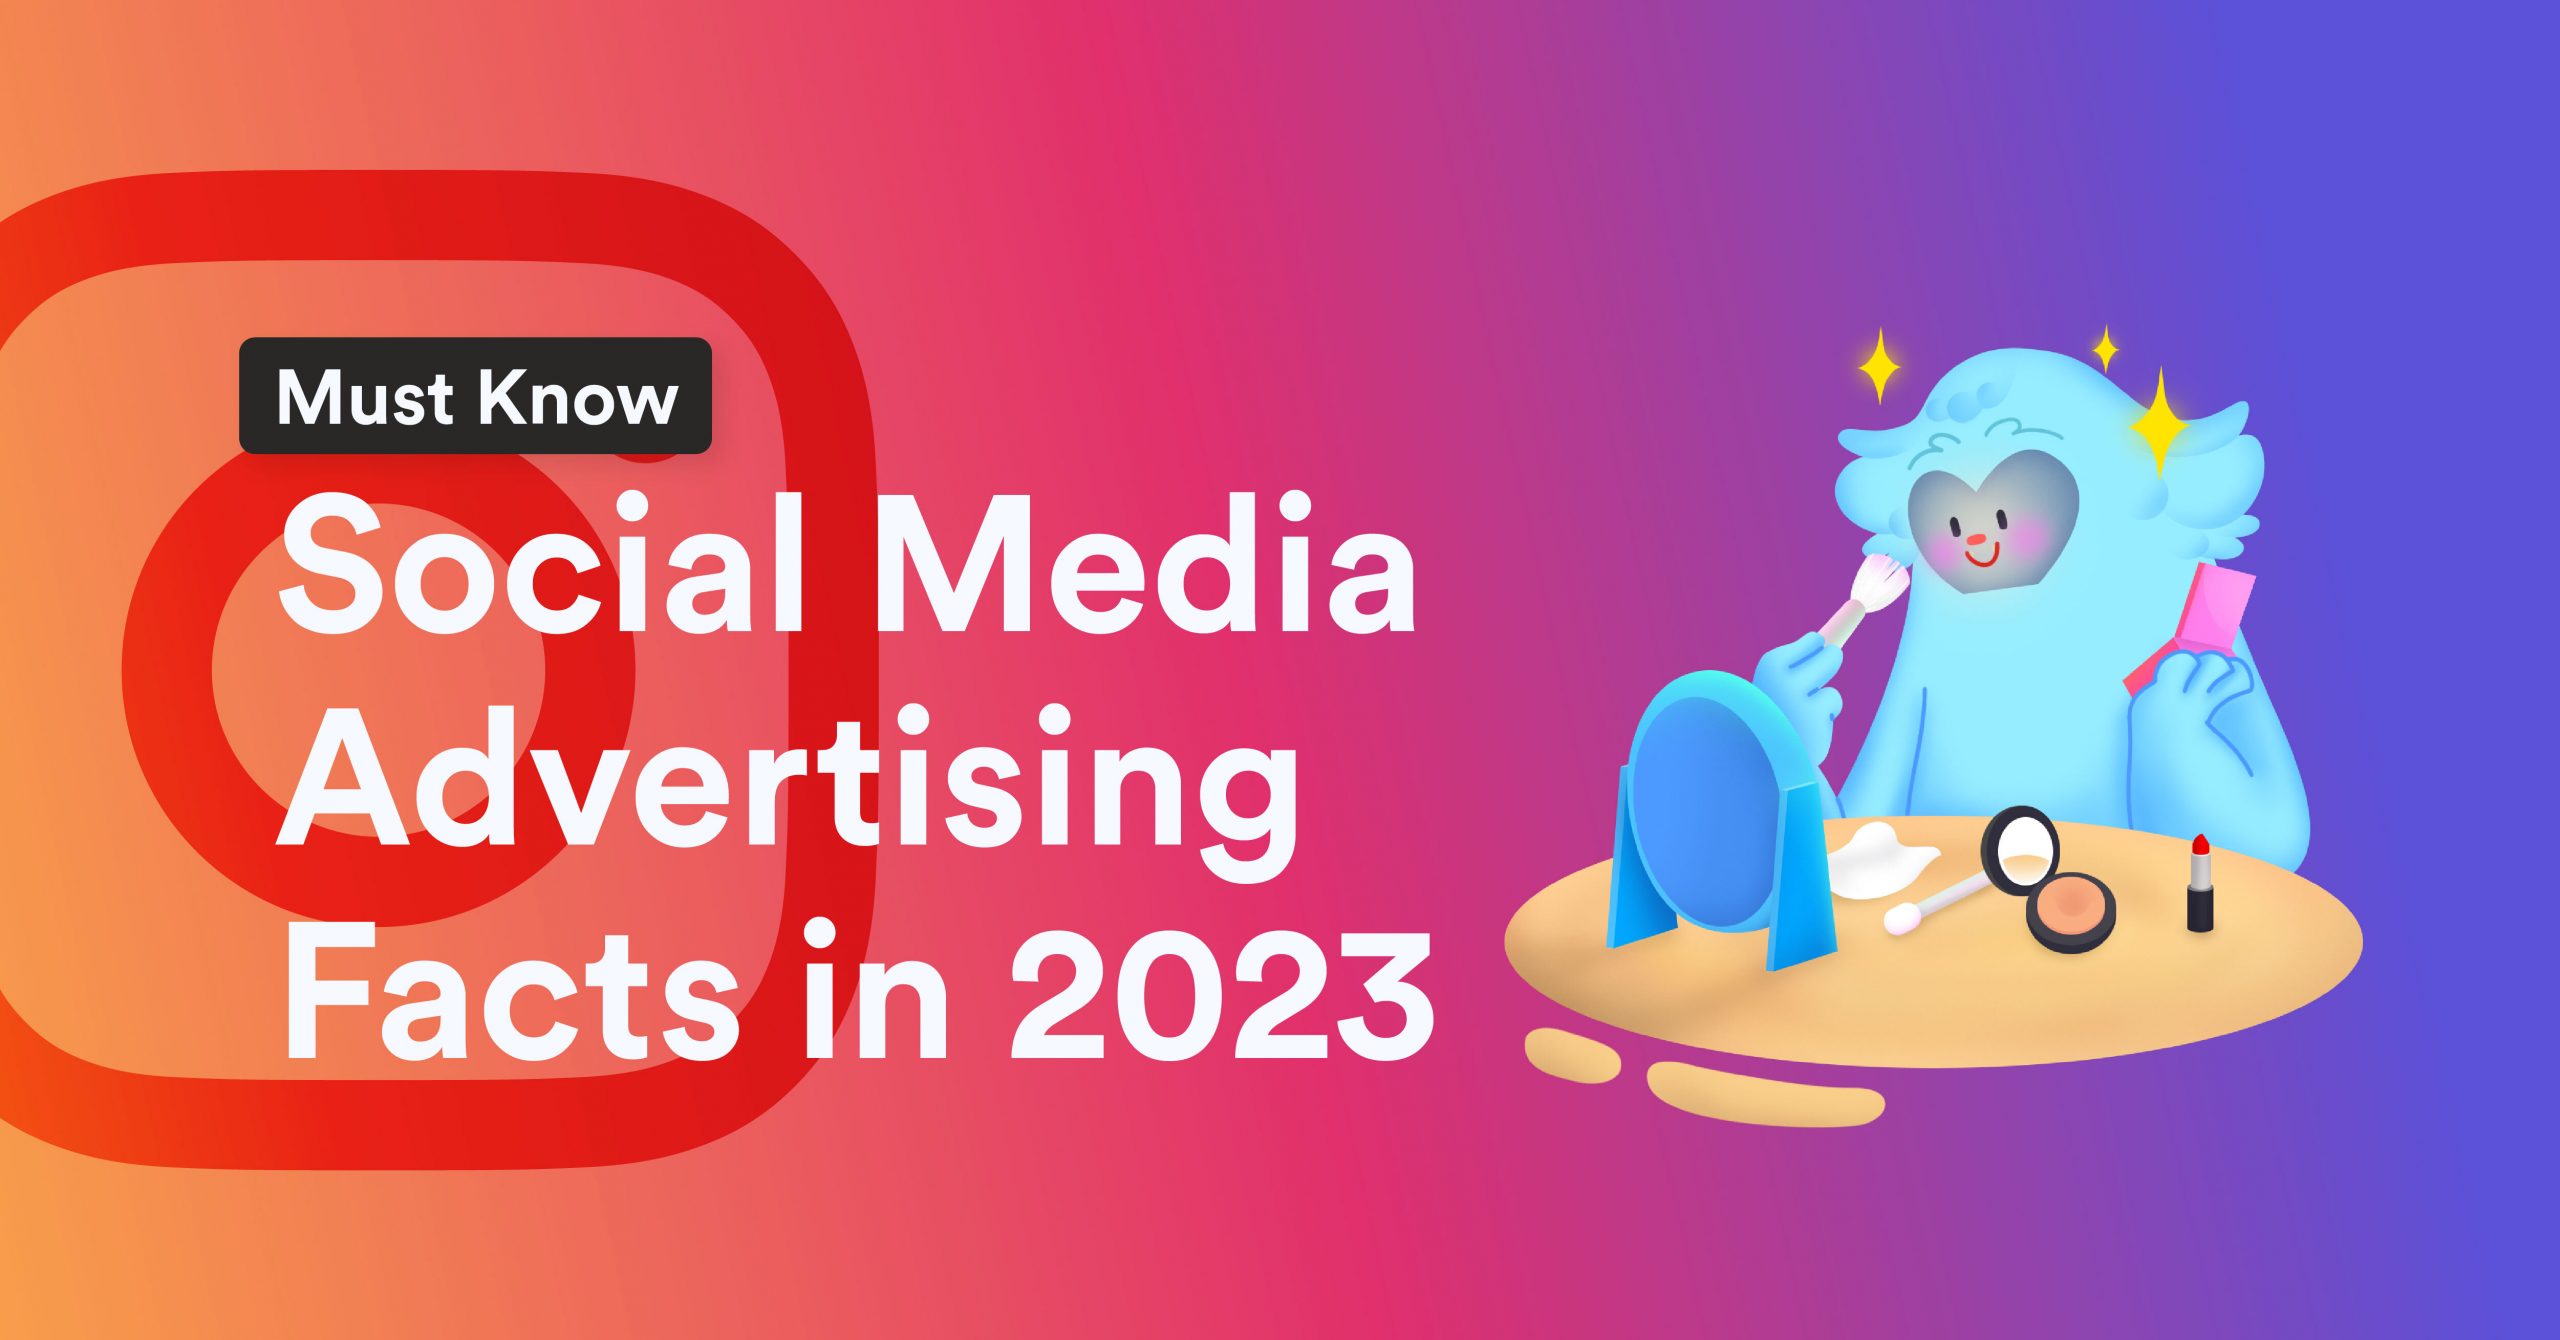 [Instagram] Must Know Social Media Advertising Facts in 2023